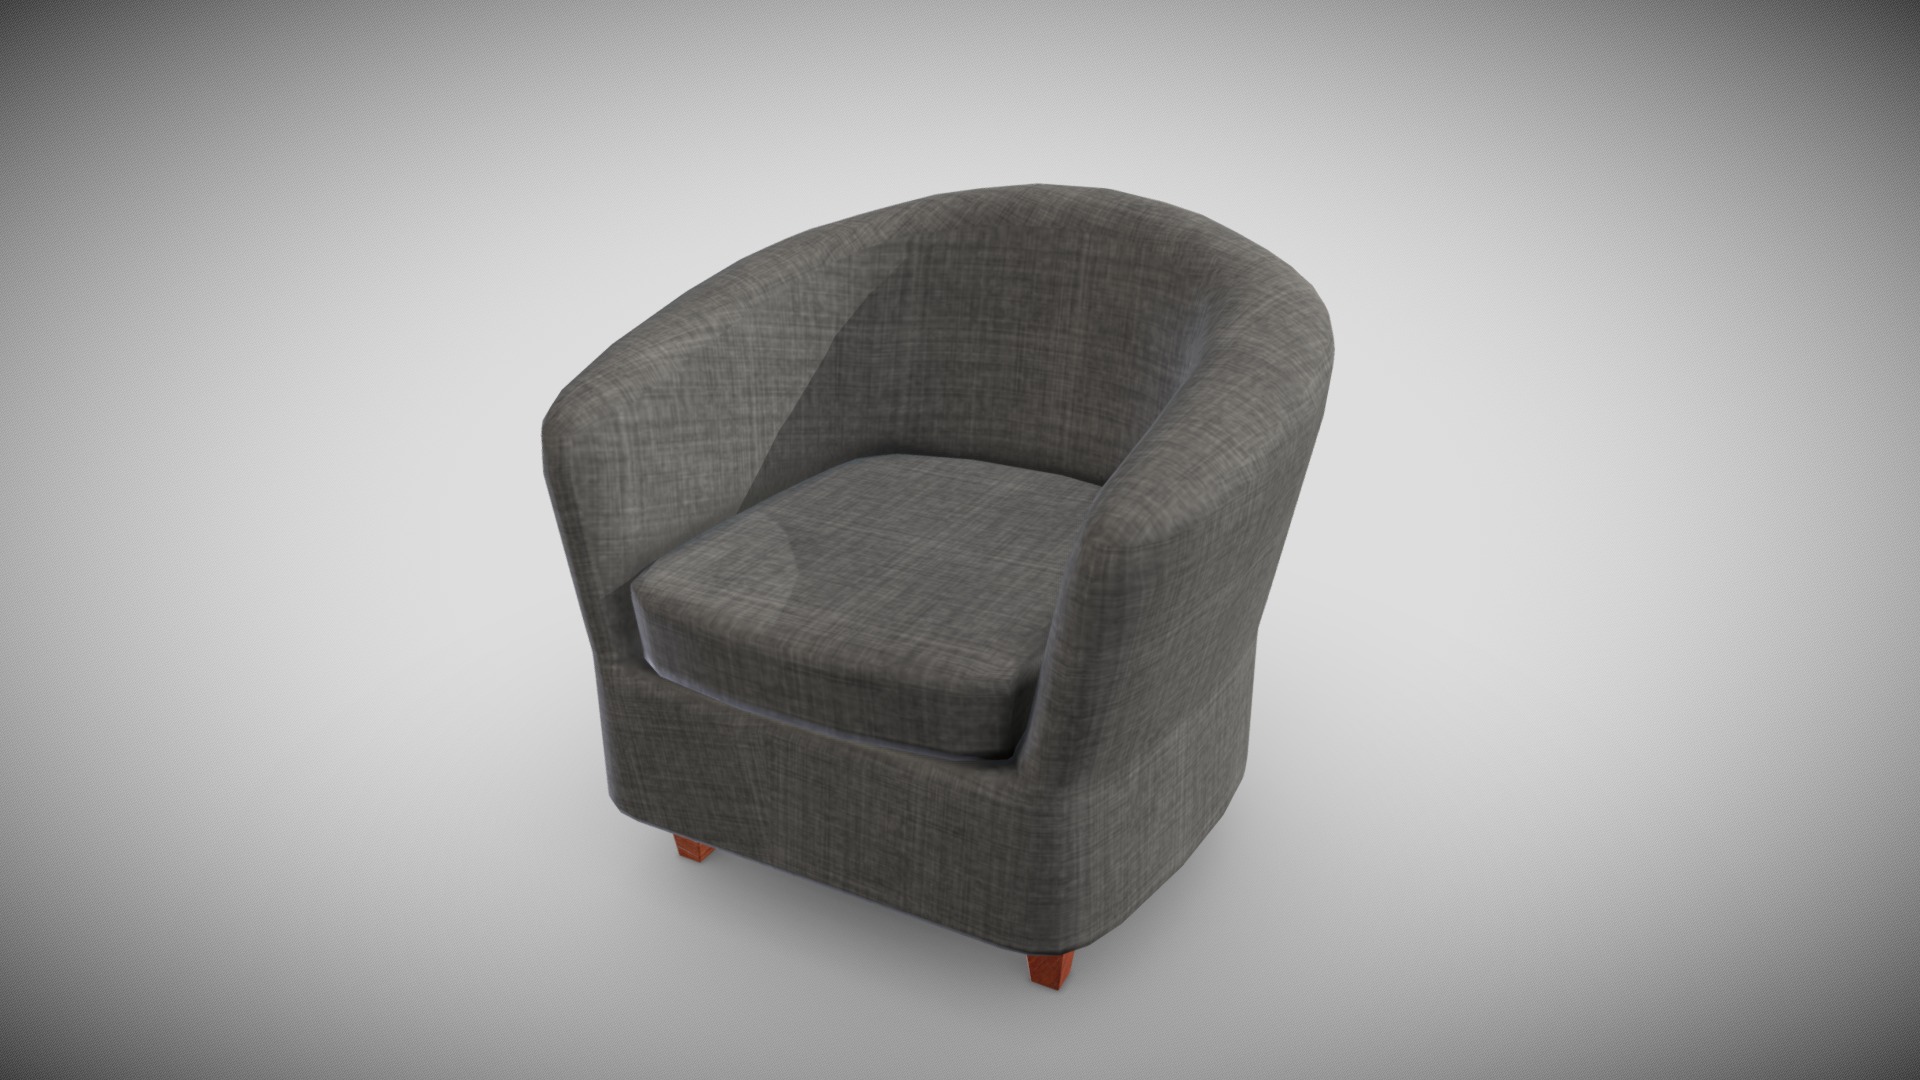 3D model Basic Armchair - This is a 3D model of the Basic Armchair. The 3D model is about a grey chair with a cushion.